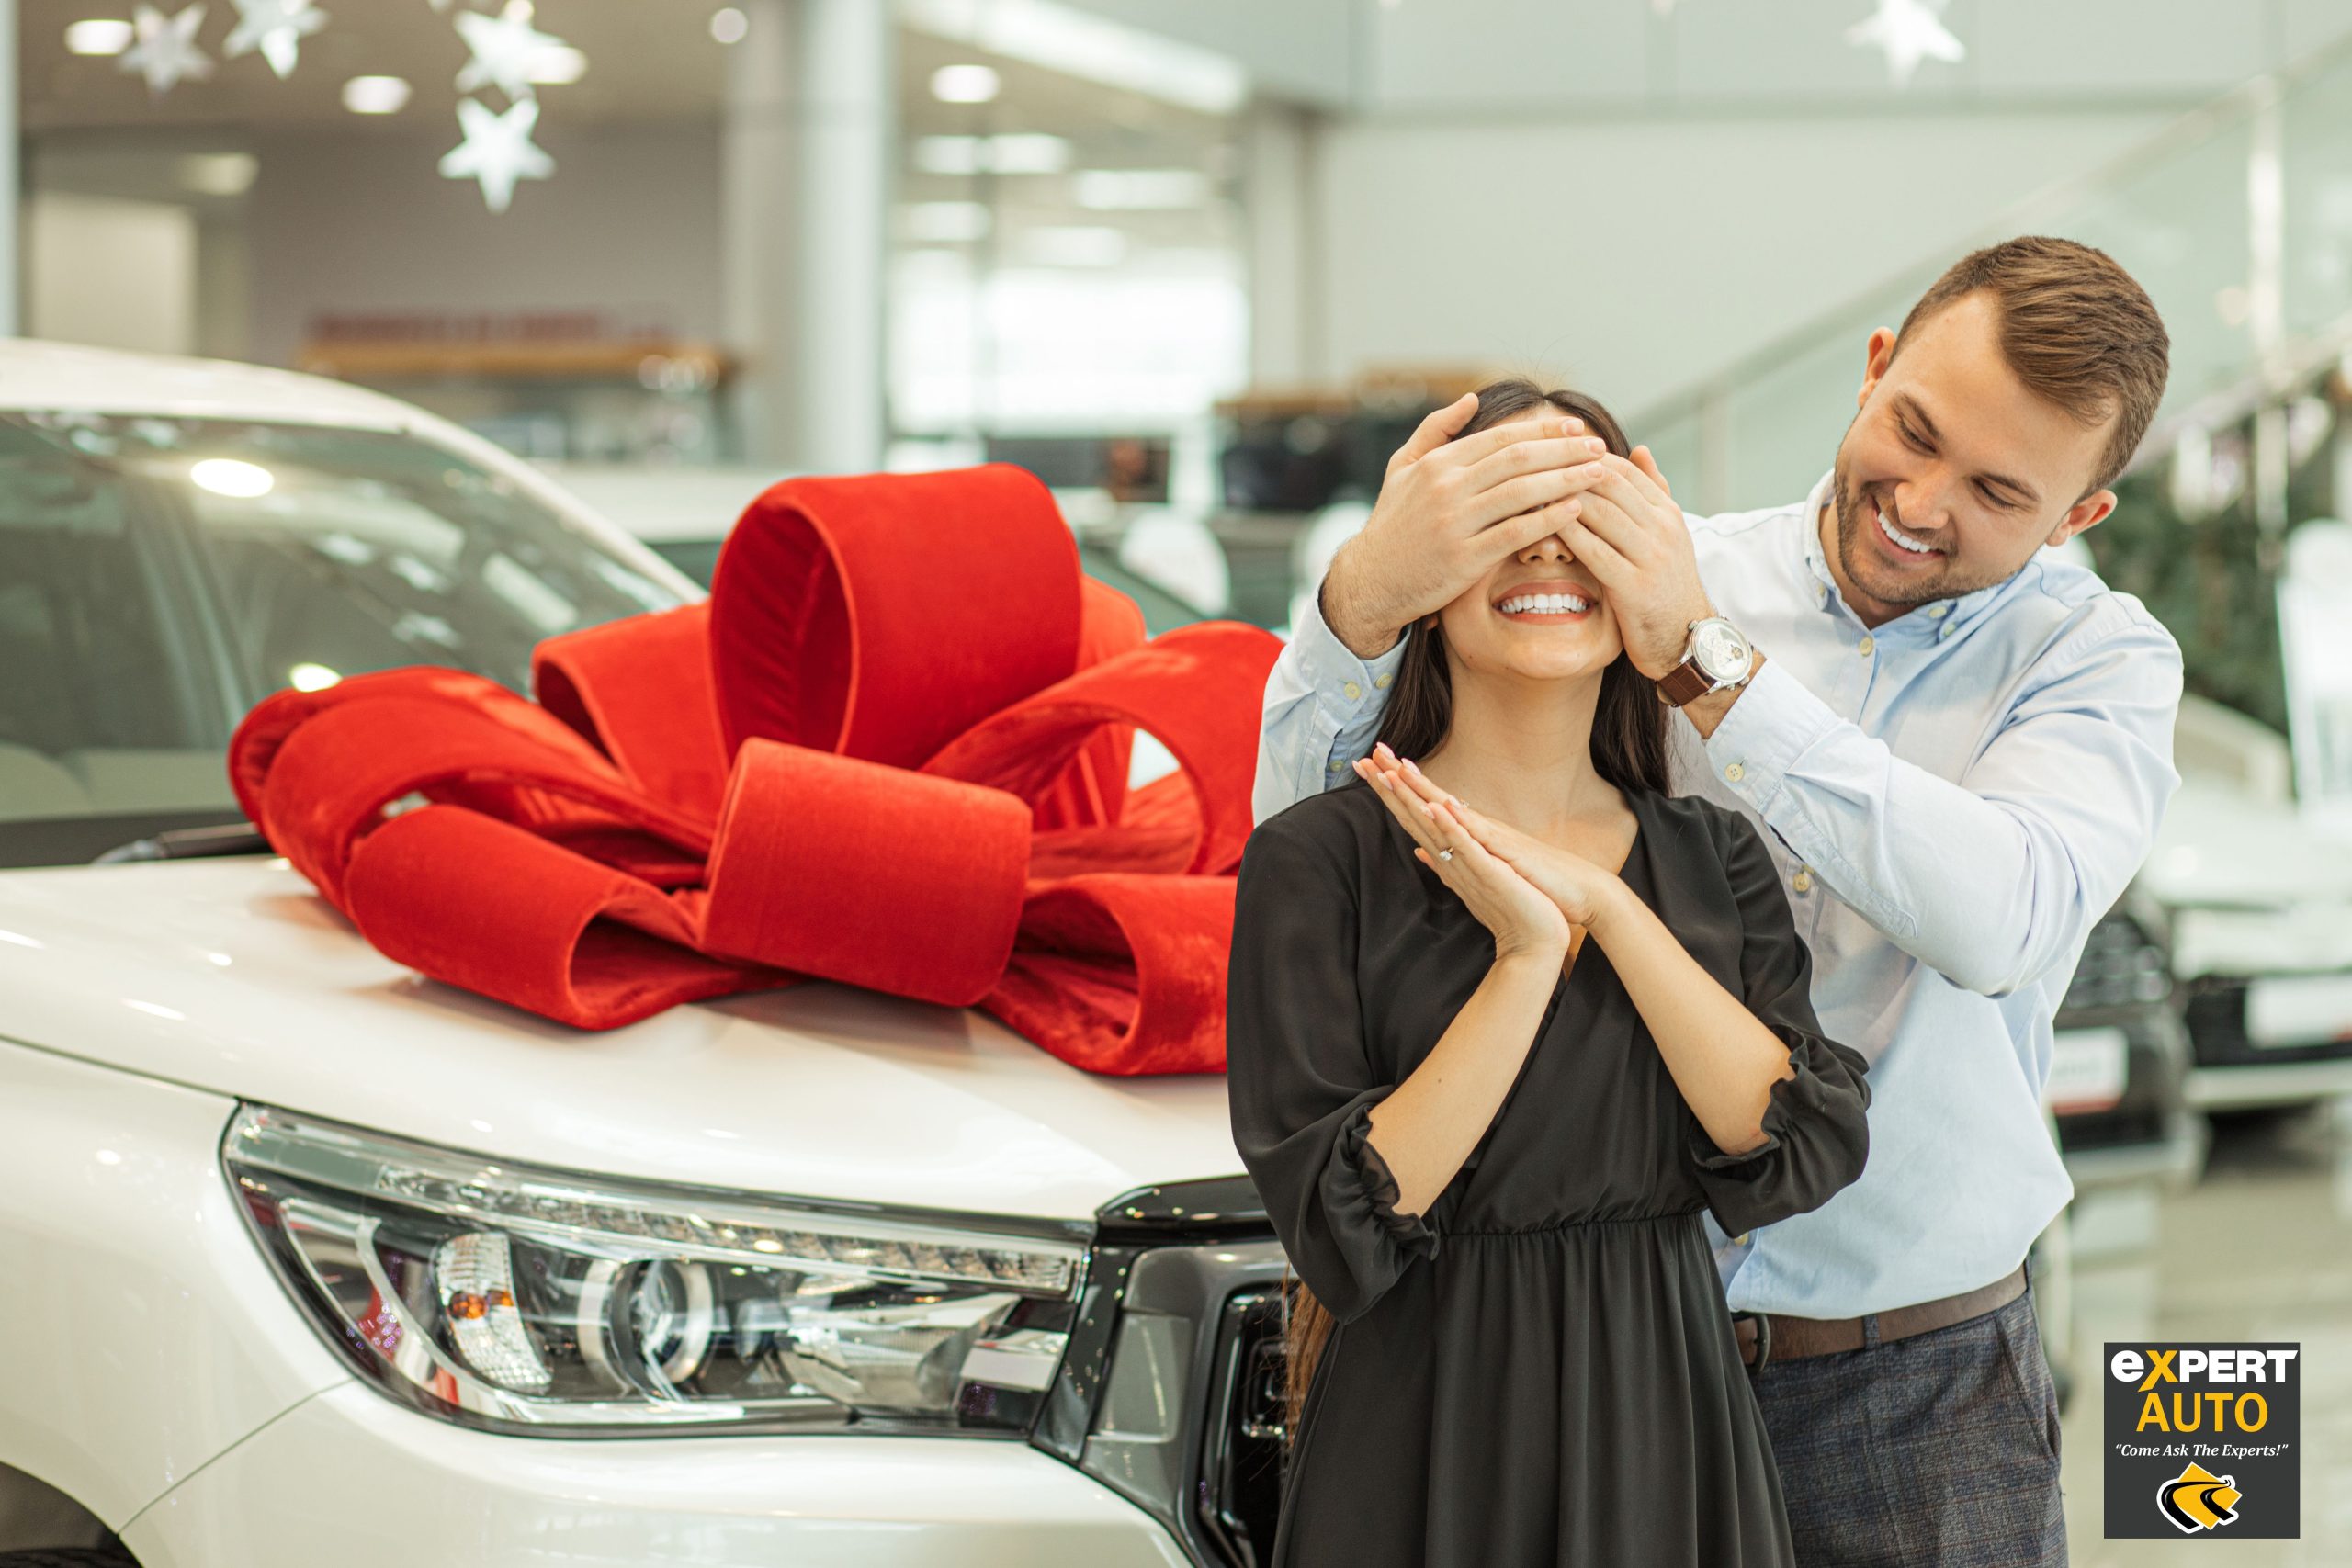 Visiting A Car Dealership? Here's What To Bring!